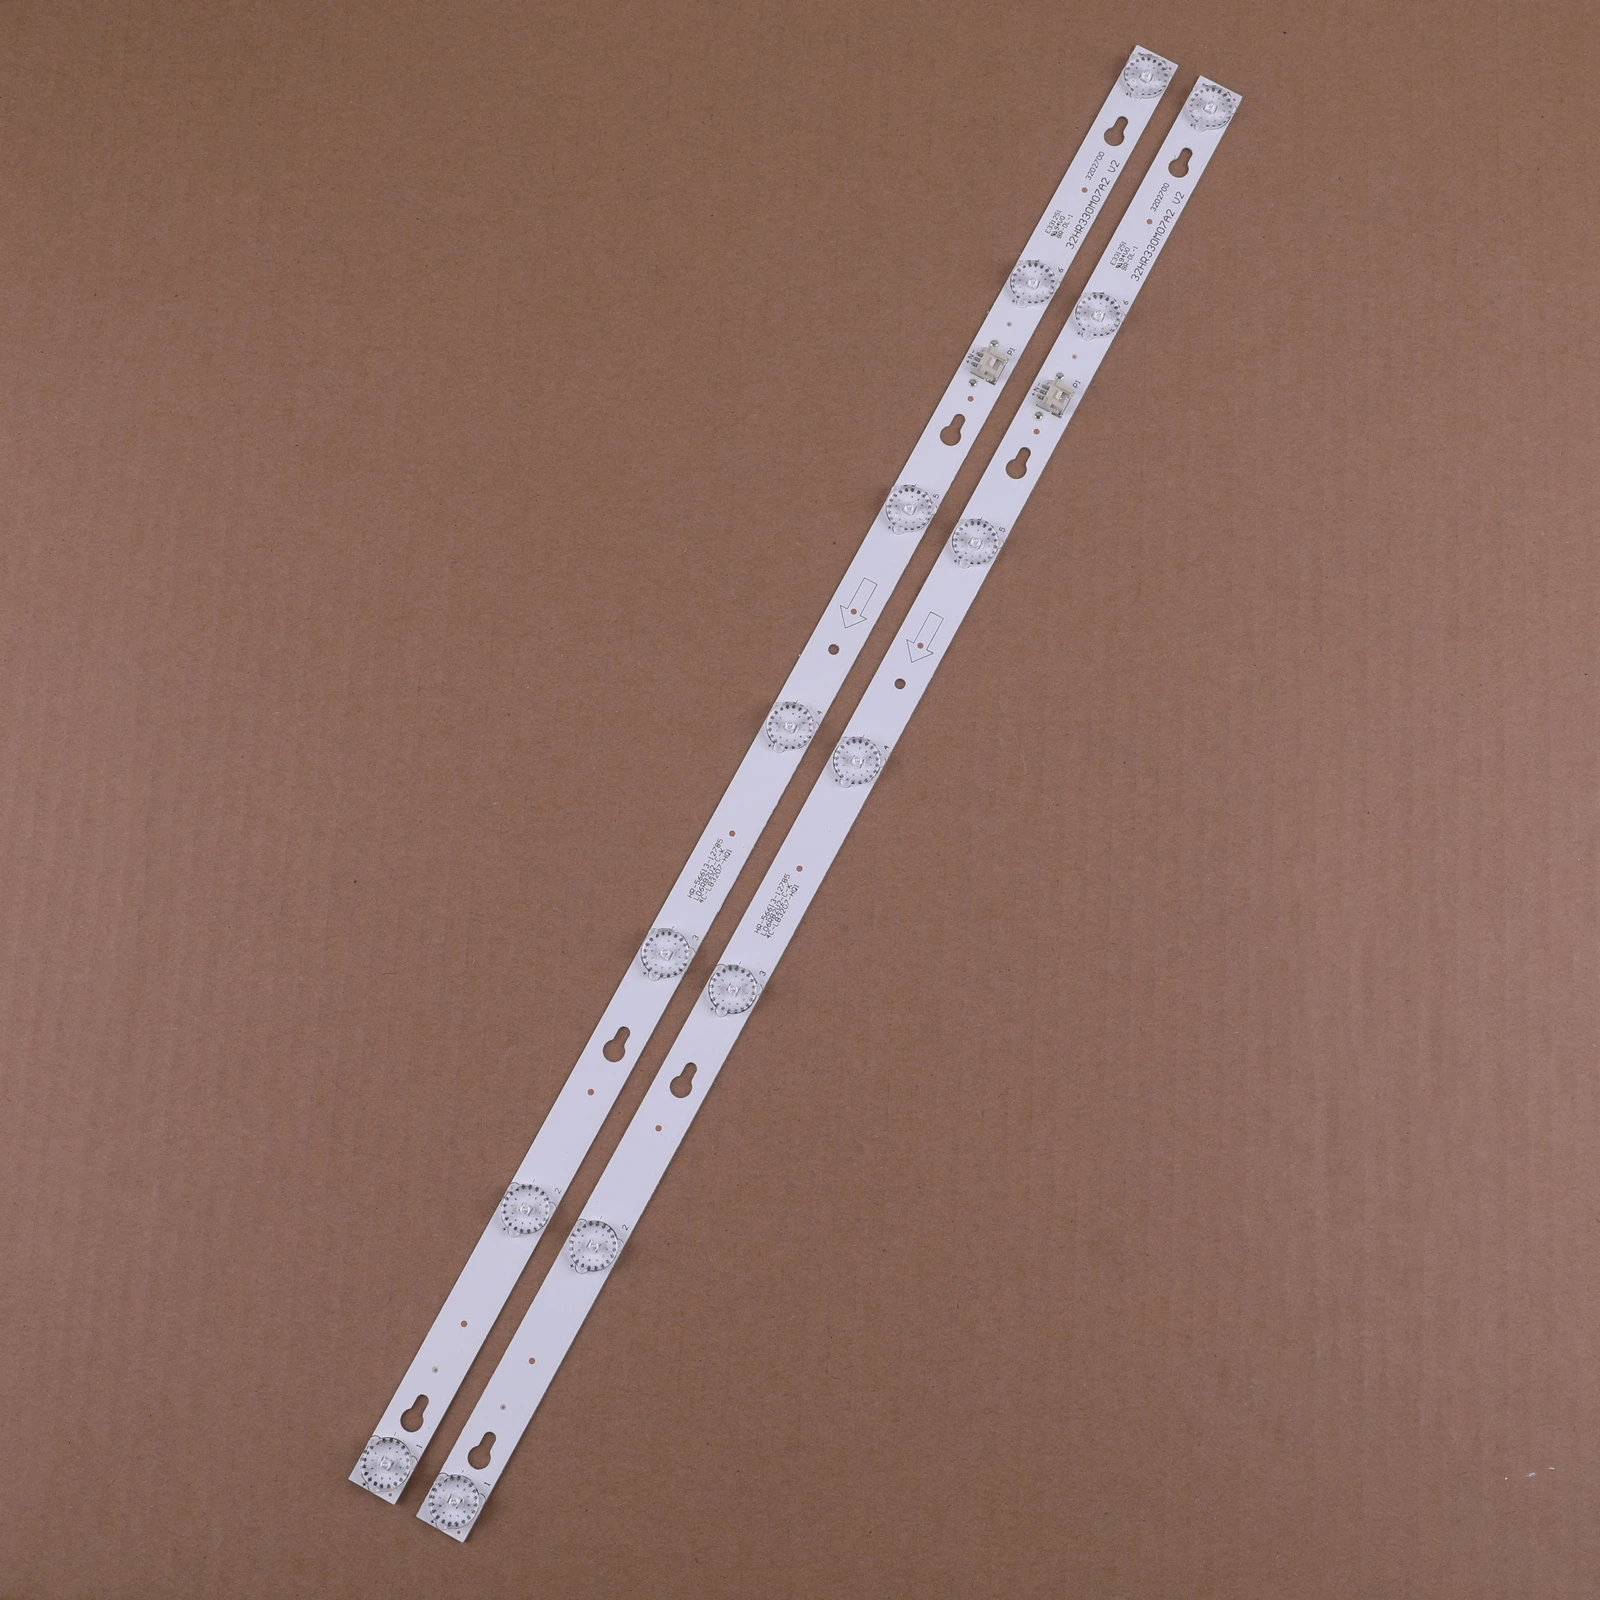 

1Set= 2Pieces LED Backlight Lamp strip Apply TCL TV TCL L32F3303B YHA-4C-LB320T-YHL LVW320CSOT E227 32HR330M07A2